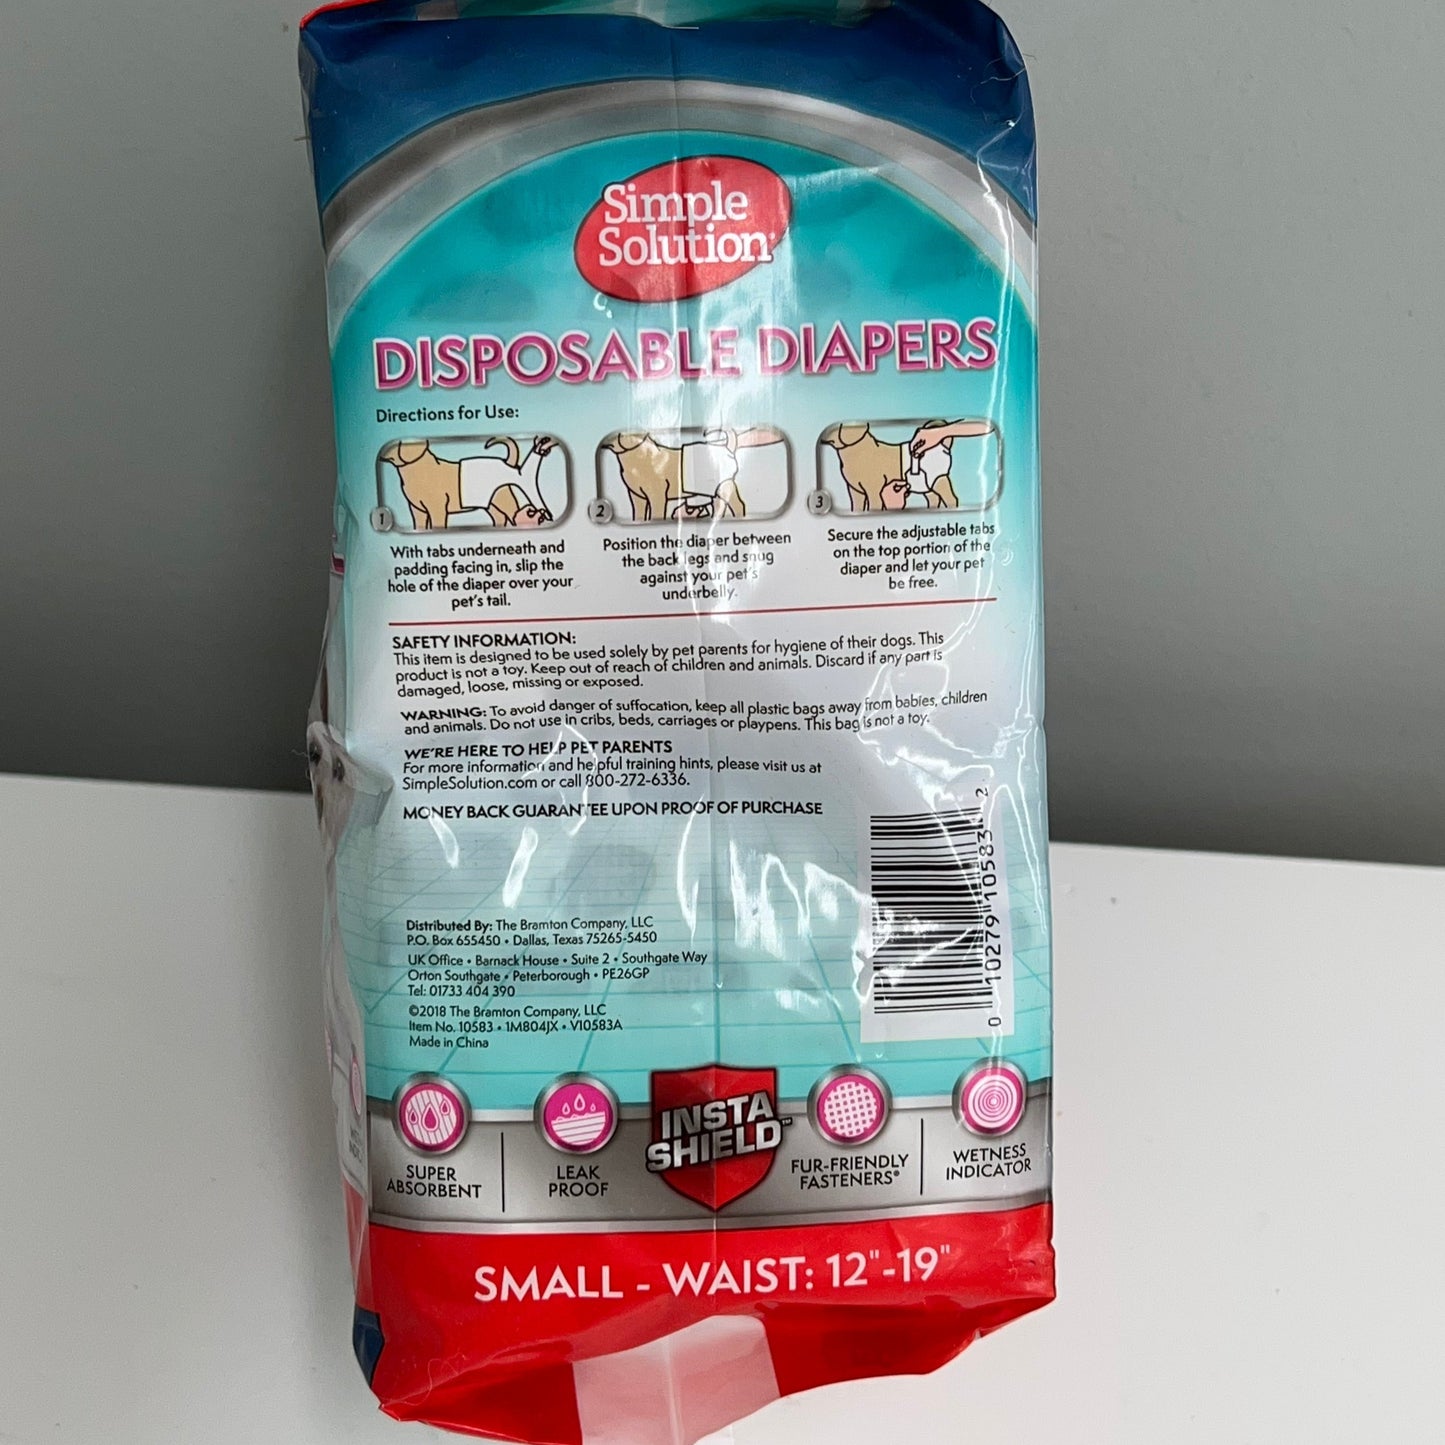 Simple Solution Disposable Diapers- Small